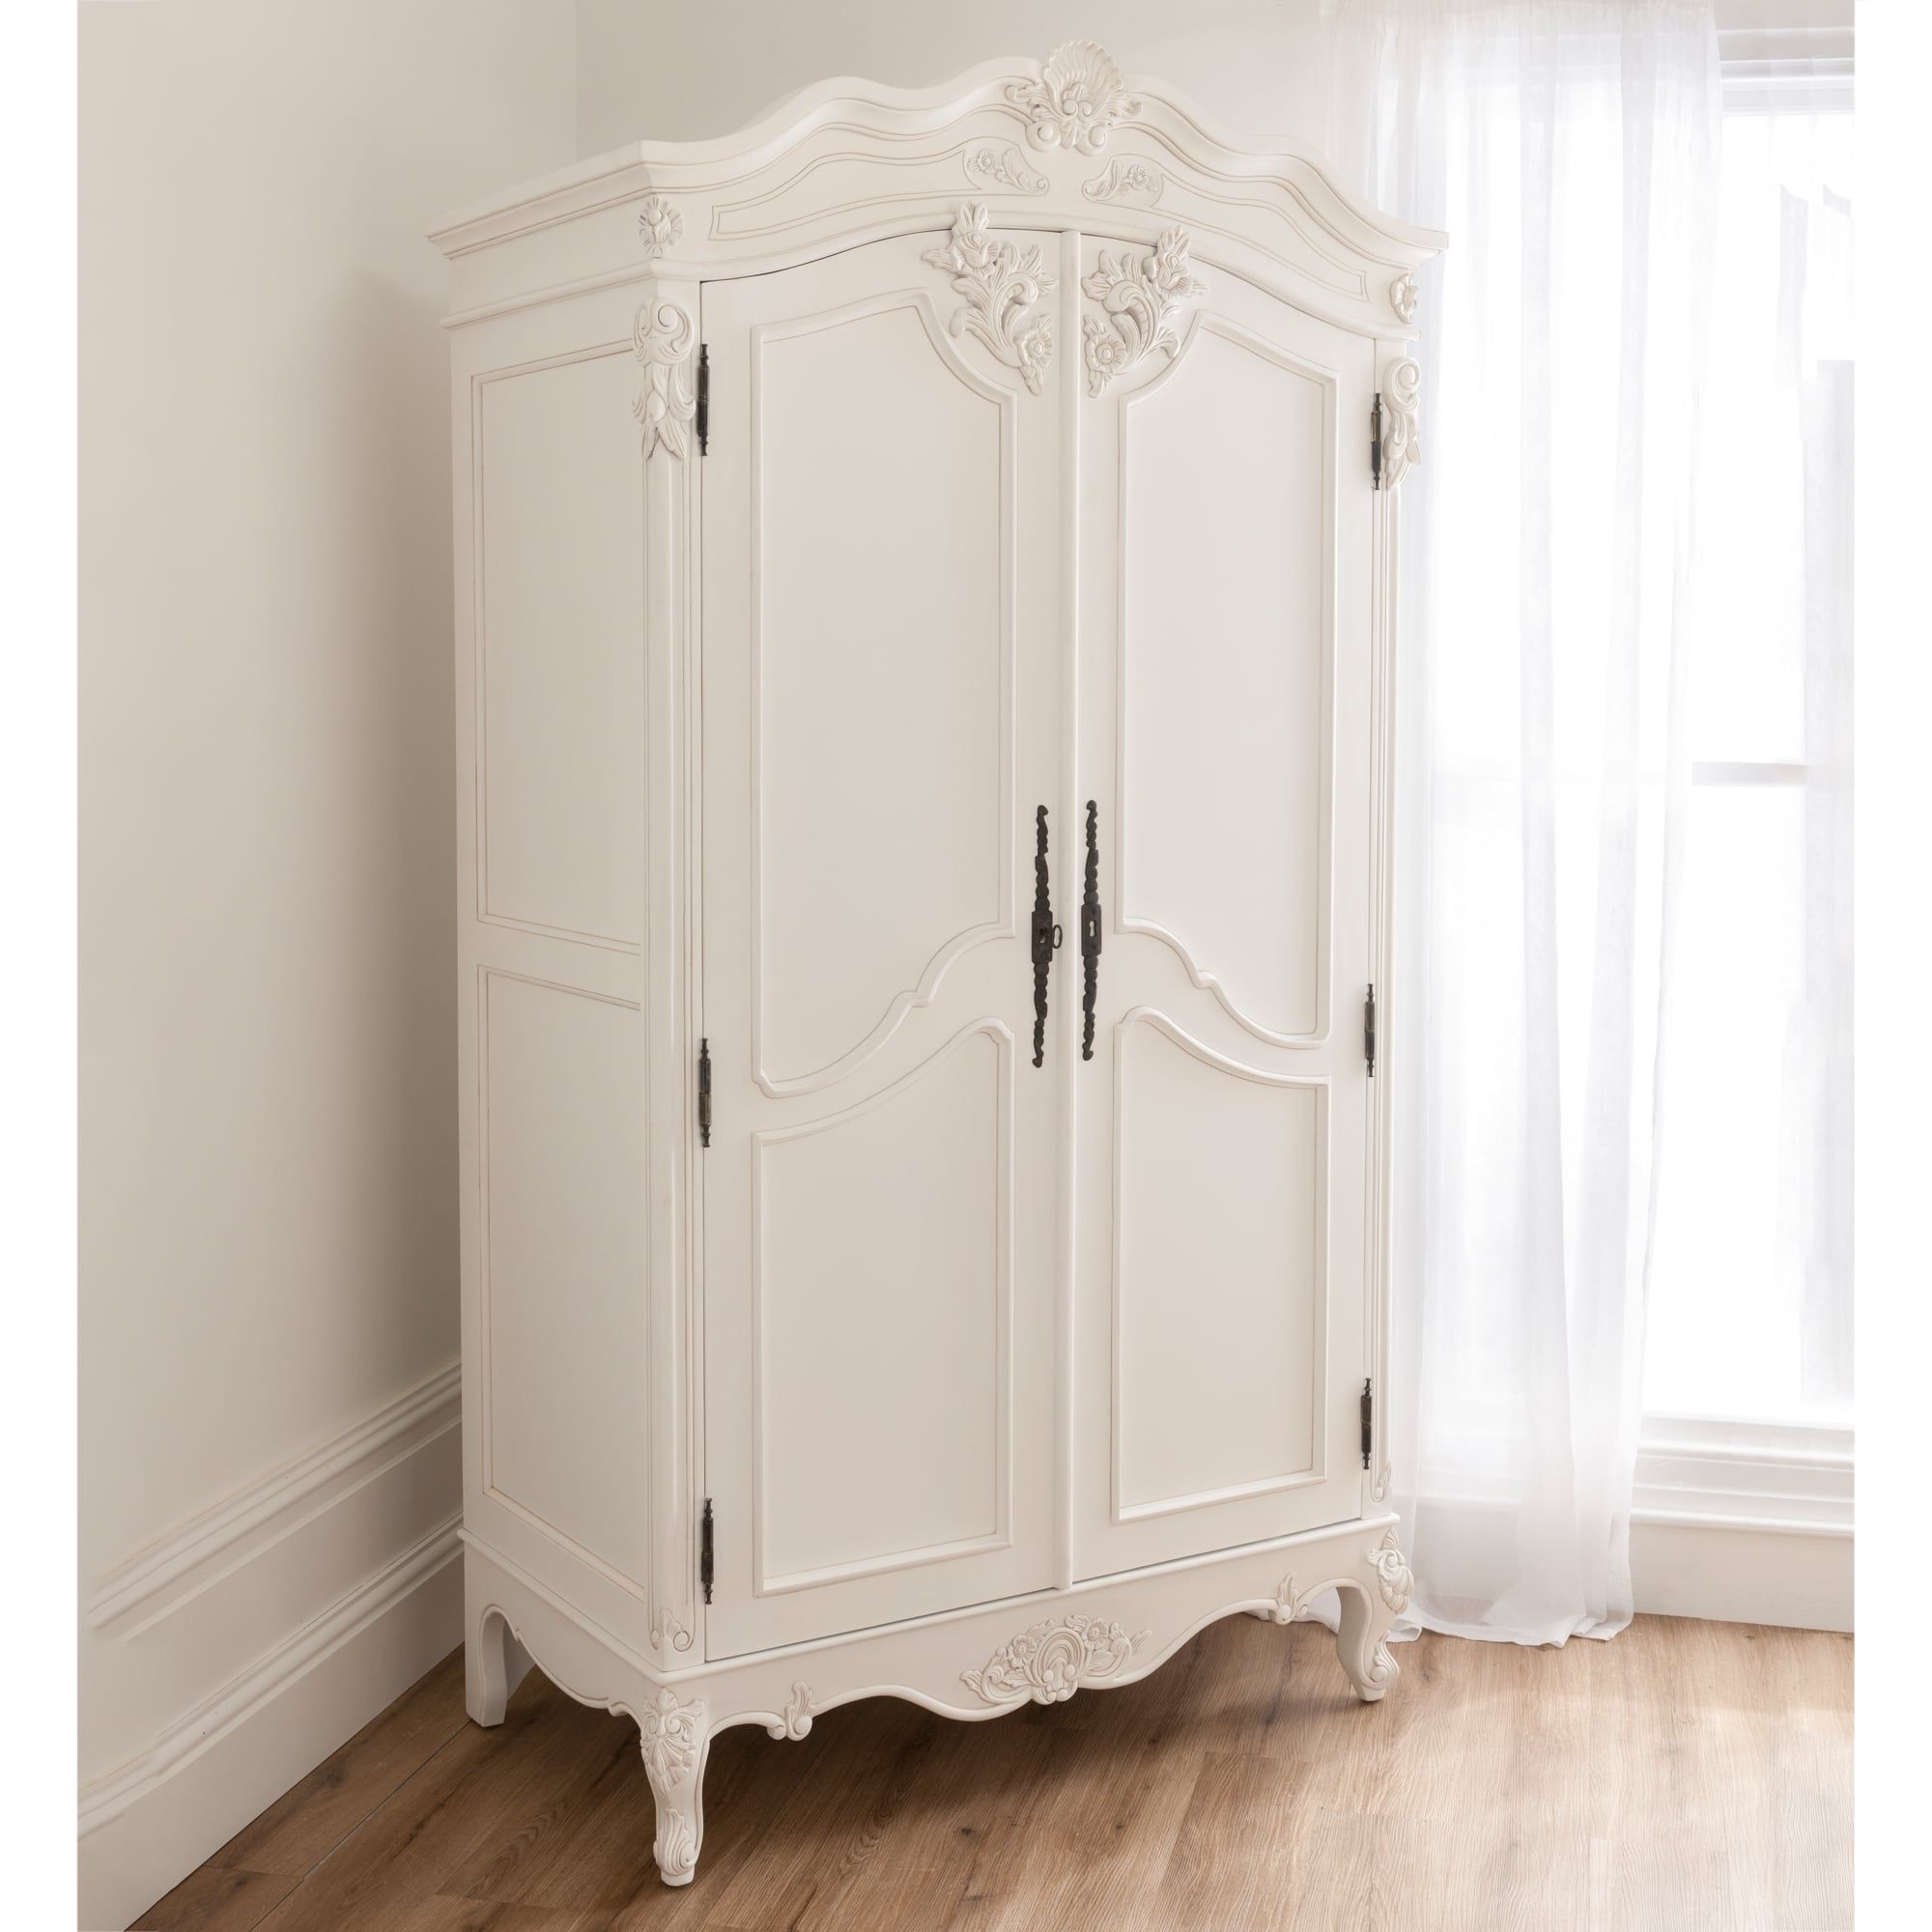 Baroque Antique French Wardrobe Is Available Online At Homesdirect365 Intended For White French Style Wardrobes (Gallery 5 of 20)